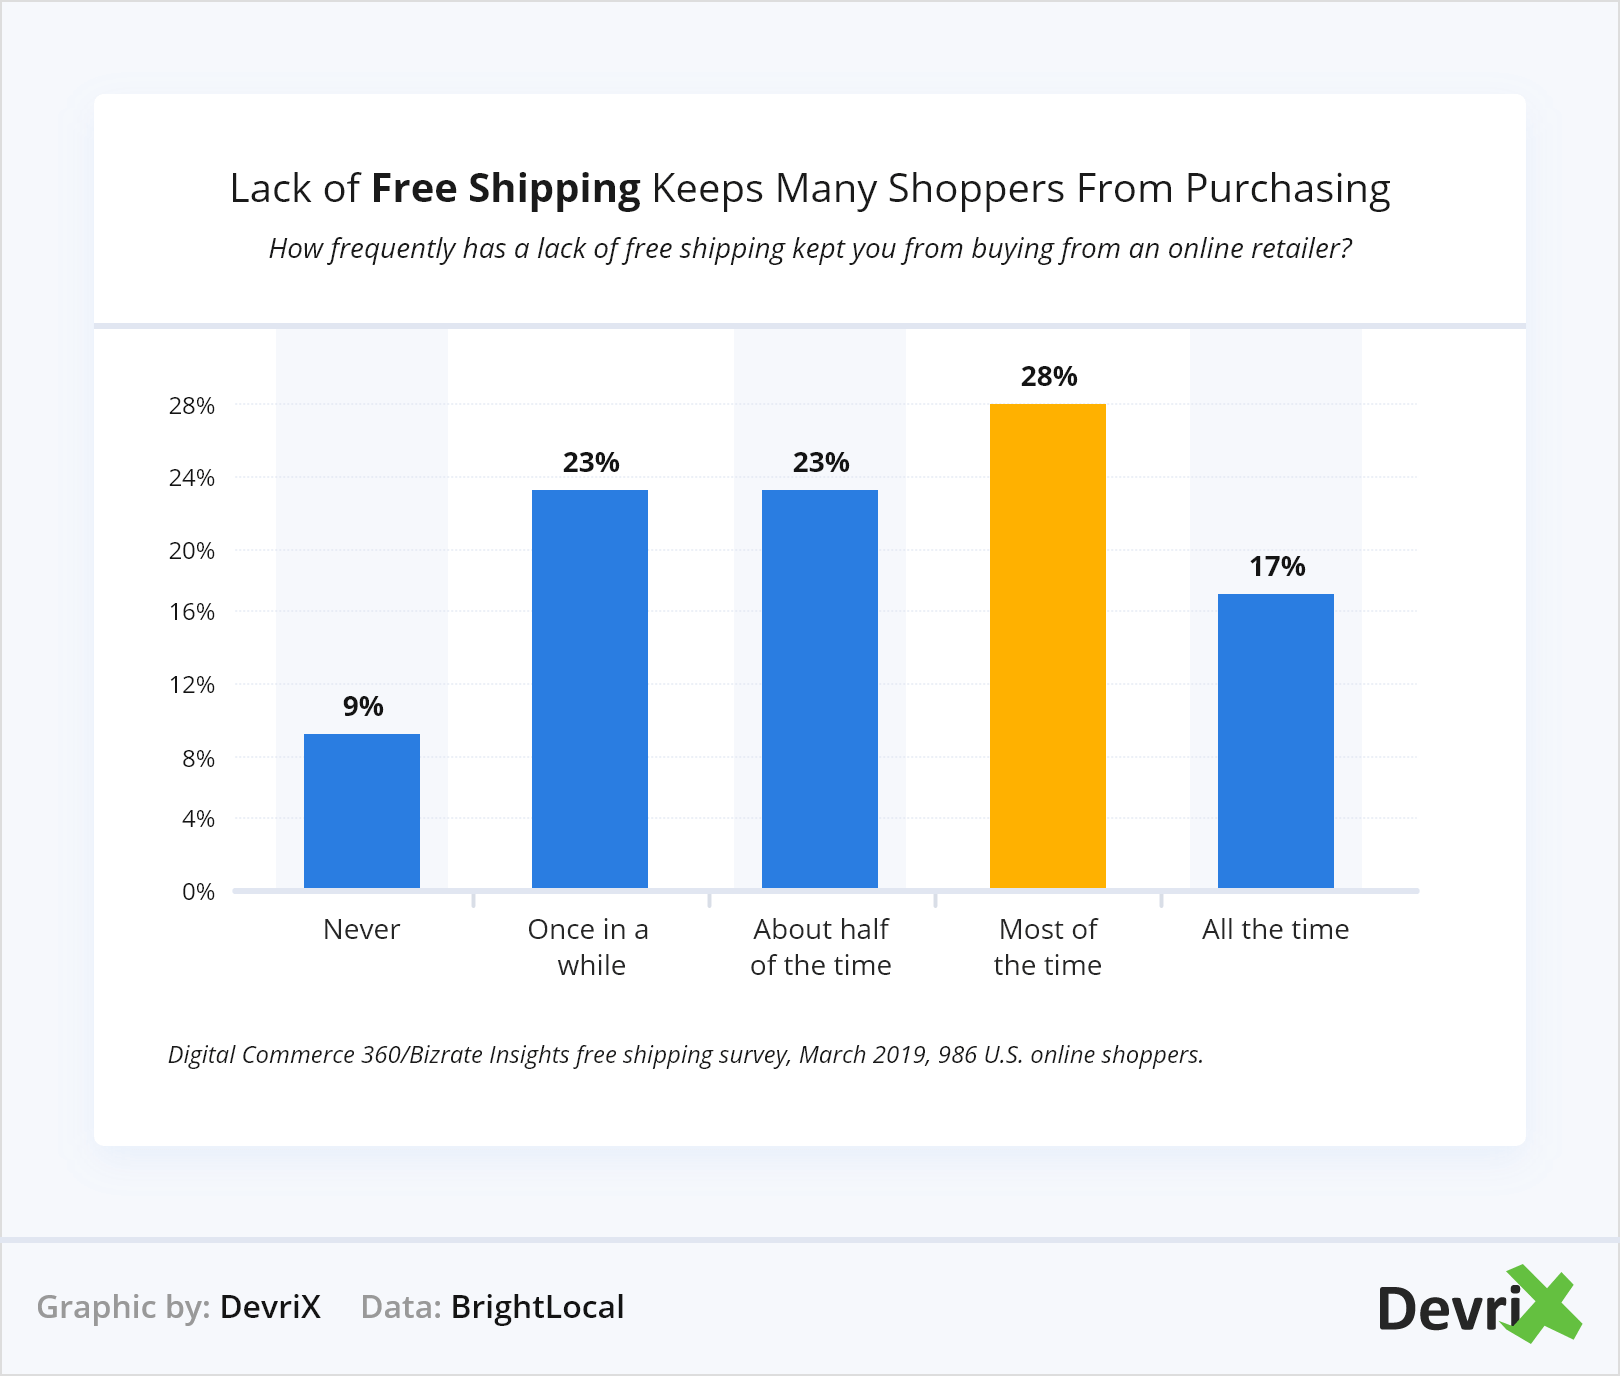 Lack of Free Shipping Keeps Many Shoppers From Purchasing